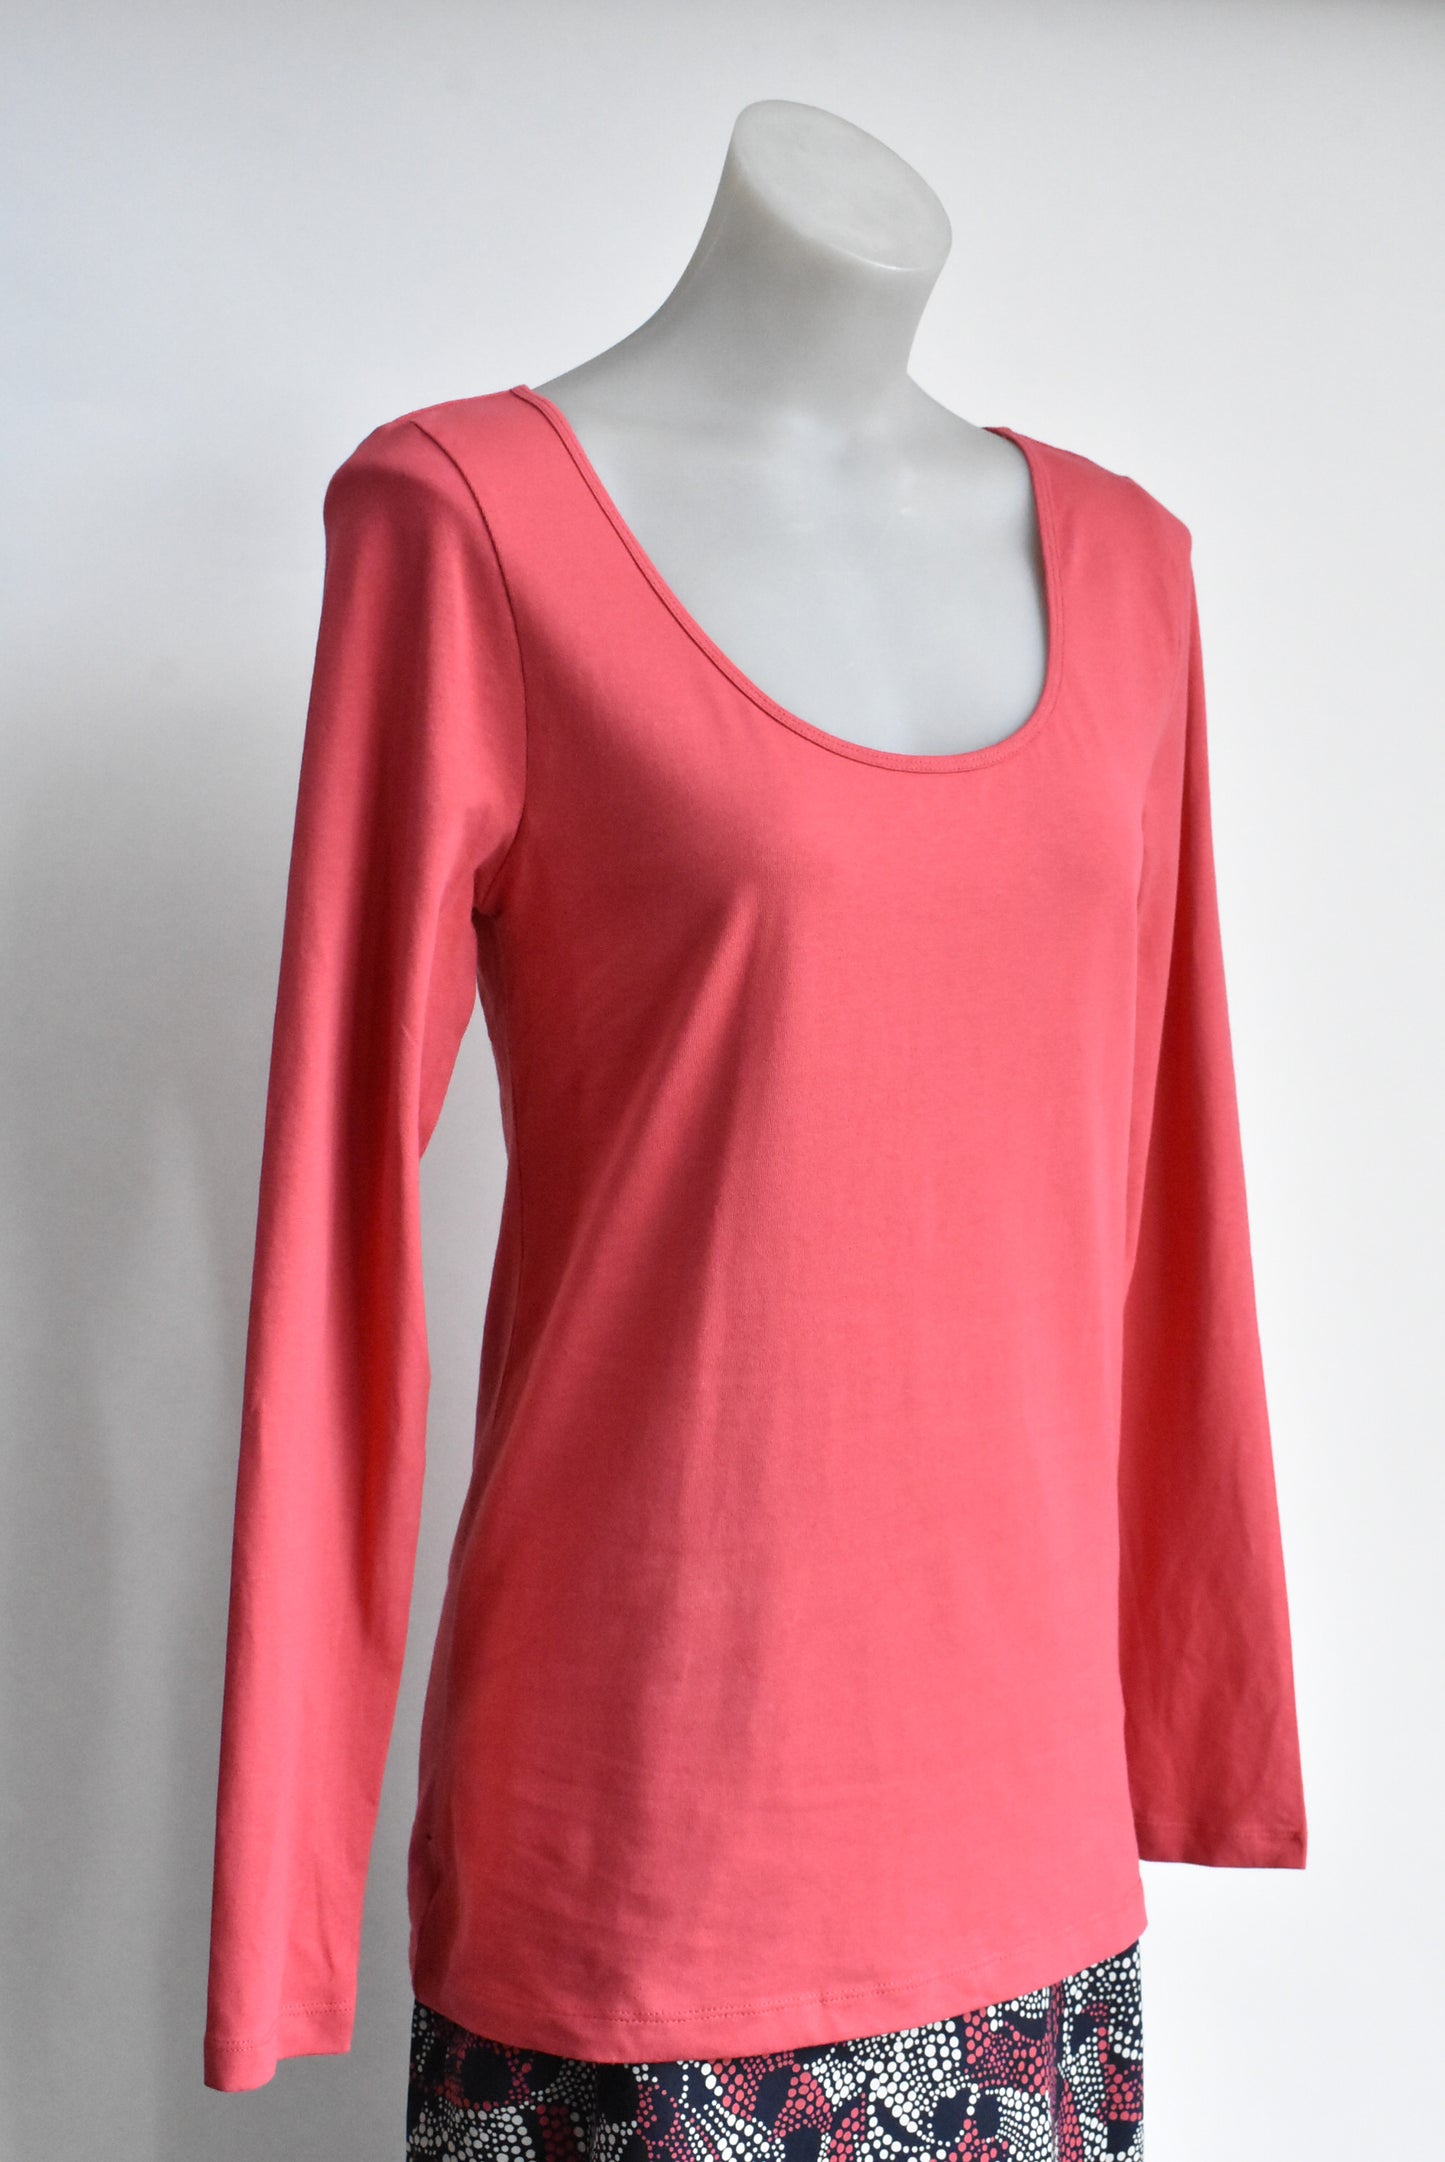 Cotton:On, long sleeved cotton T shirt, M (NWT)